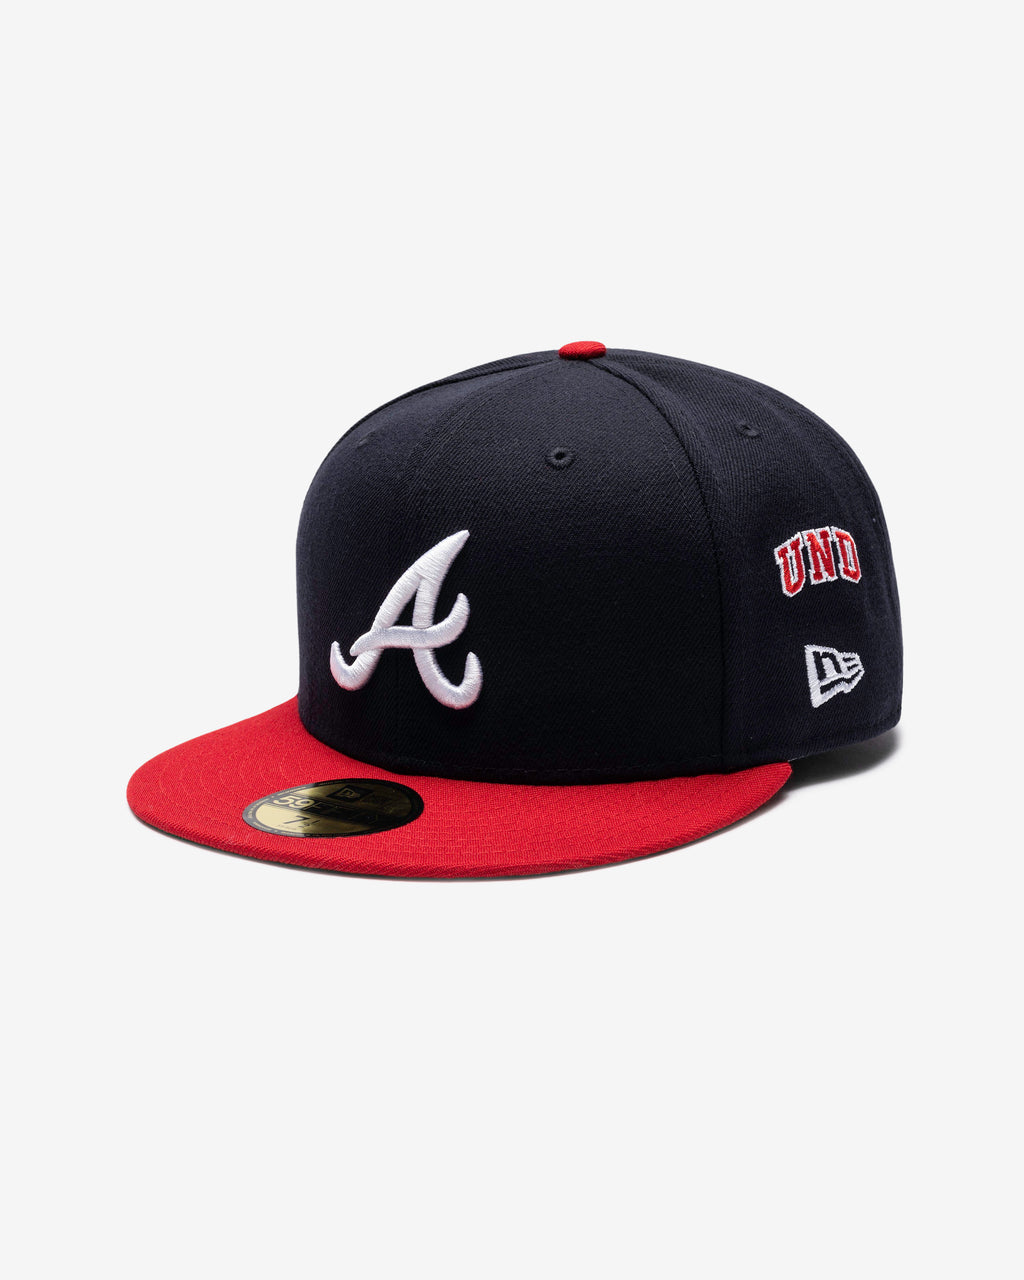 UNDEFEATED X NE X MLB FITTED - ATLANTA BRAVES